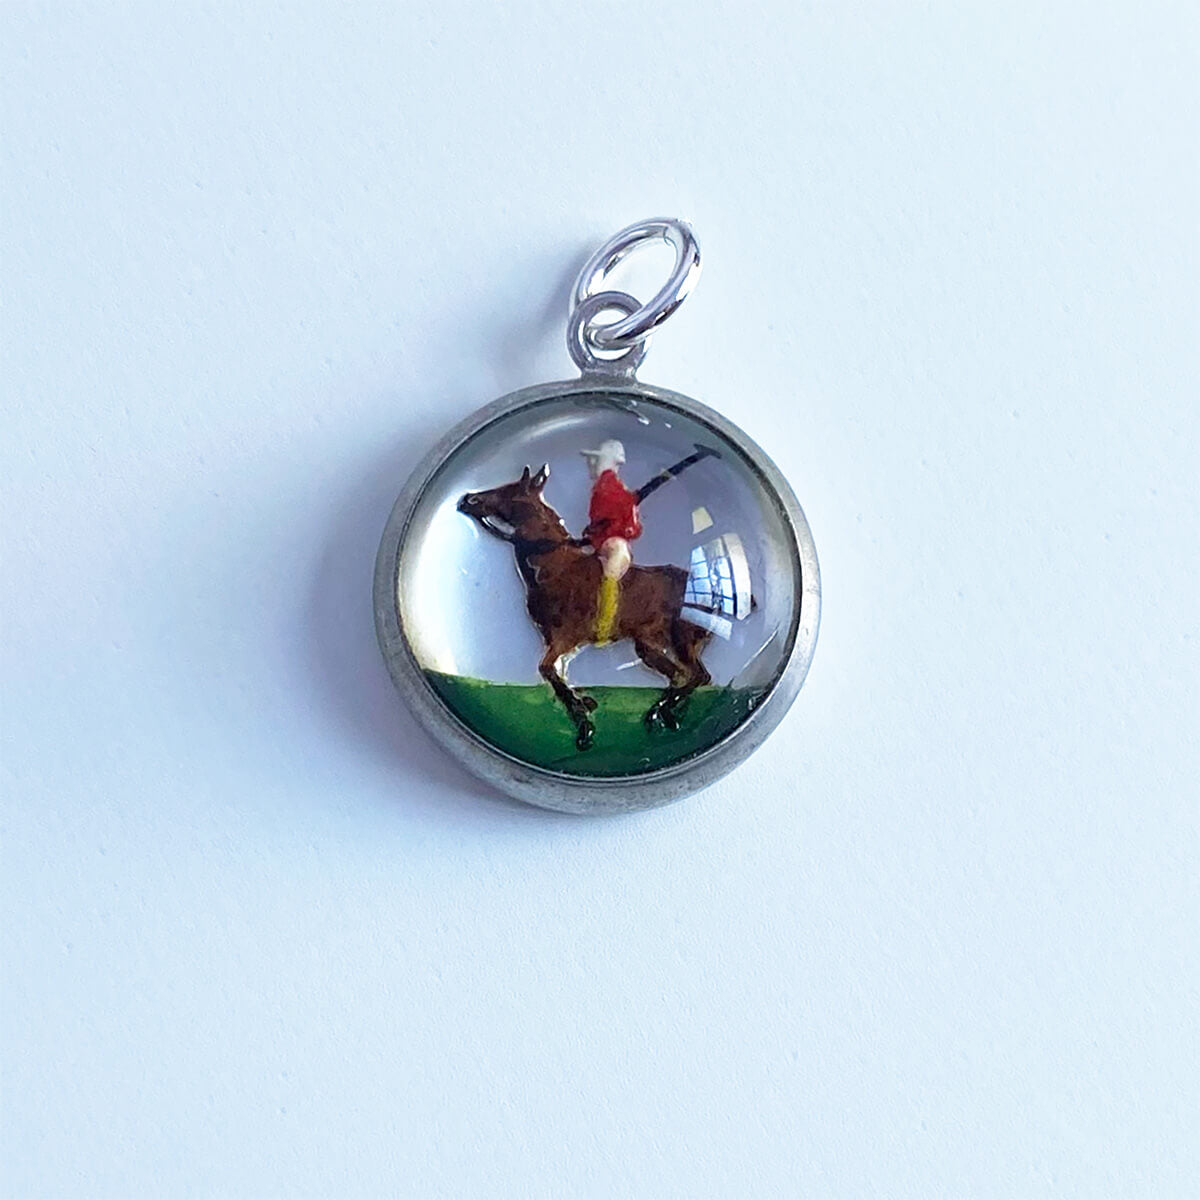 Polo pony and rider equestrian sport intaglio crystal sterling silver charm